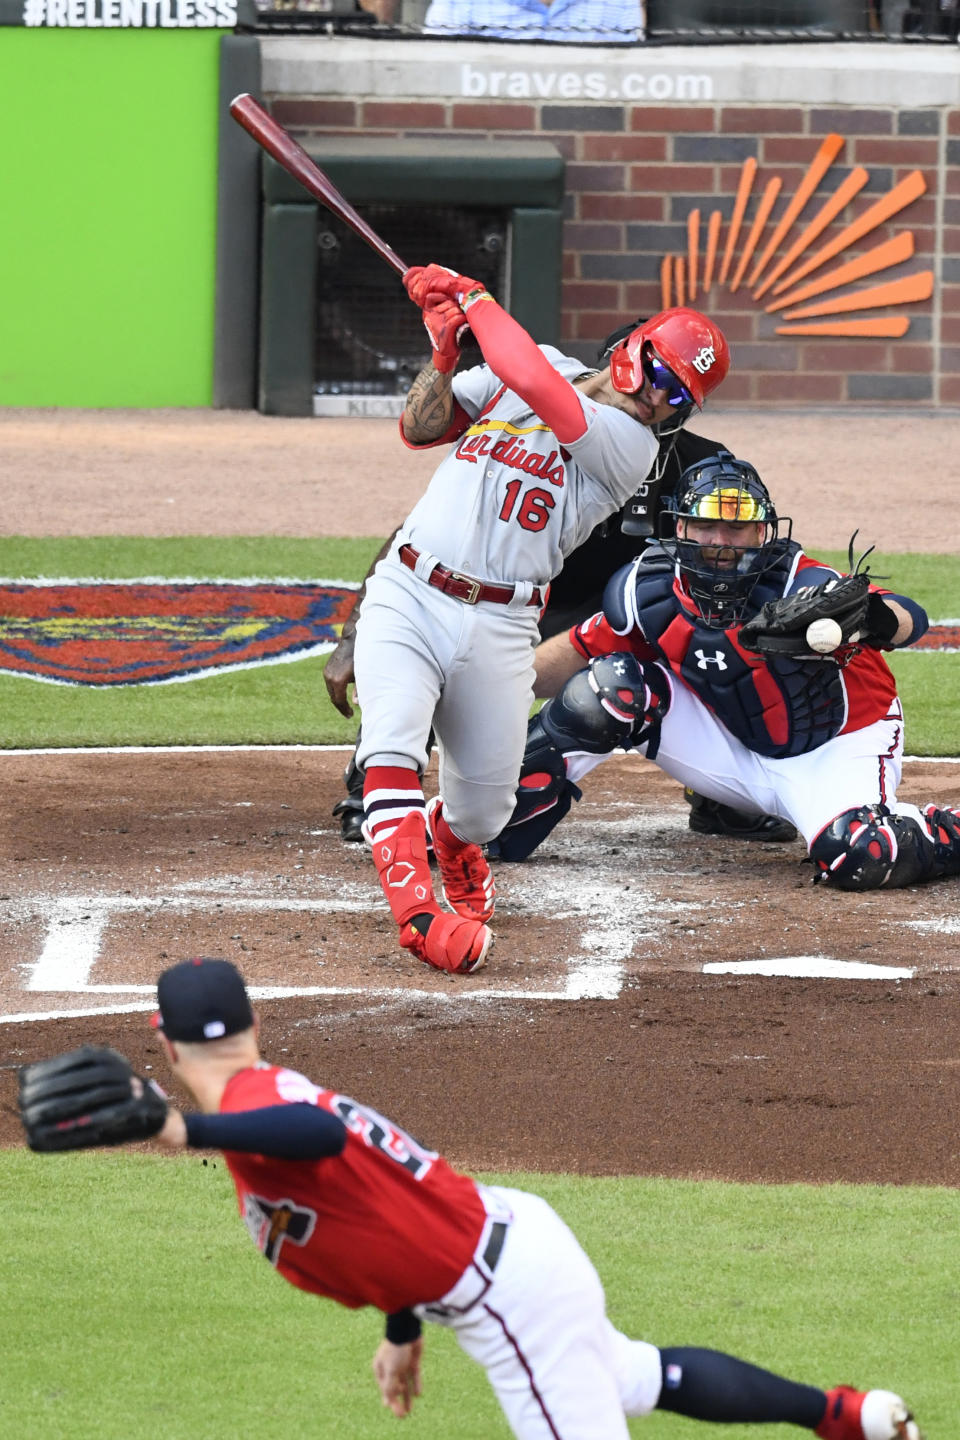 St. Louis Cardinals second baseman Kolten Wong (16) strikes out in the second inning during Game 2 of a best-of-five National League Division Series against the Atlanta Braves, Friday, Oct. 4, 2019, in Atlanta. (AP Photo/Scott Cunningham)